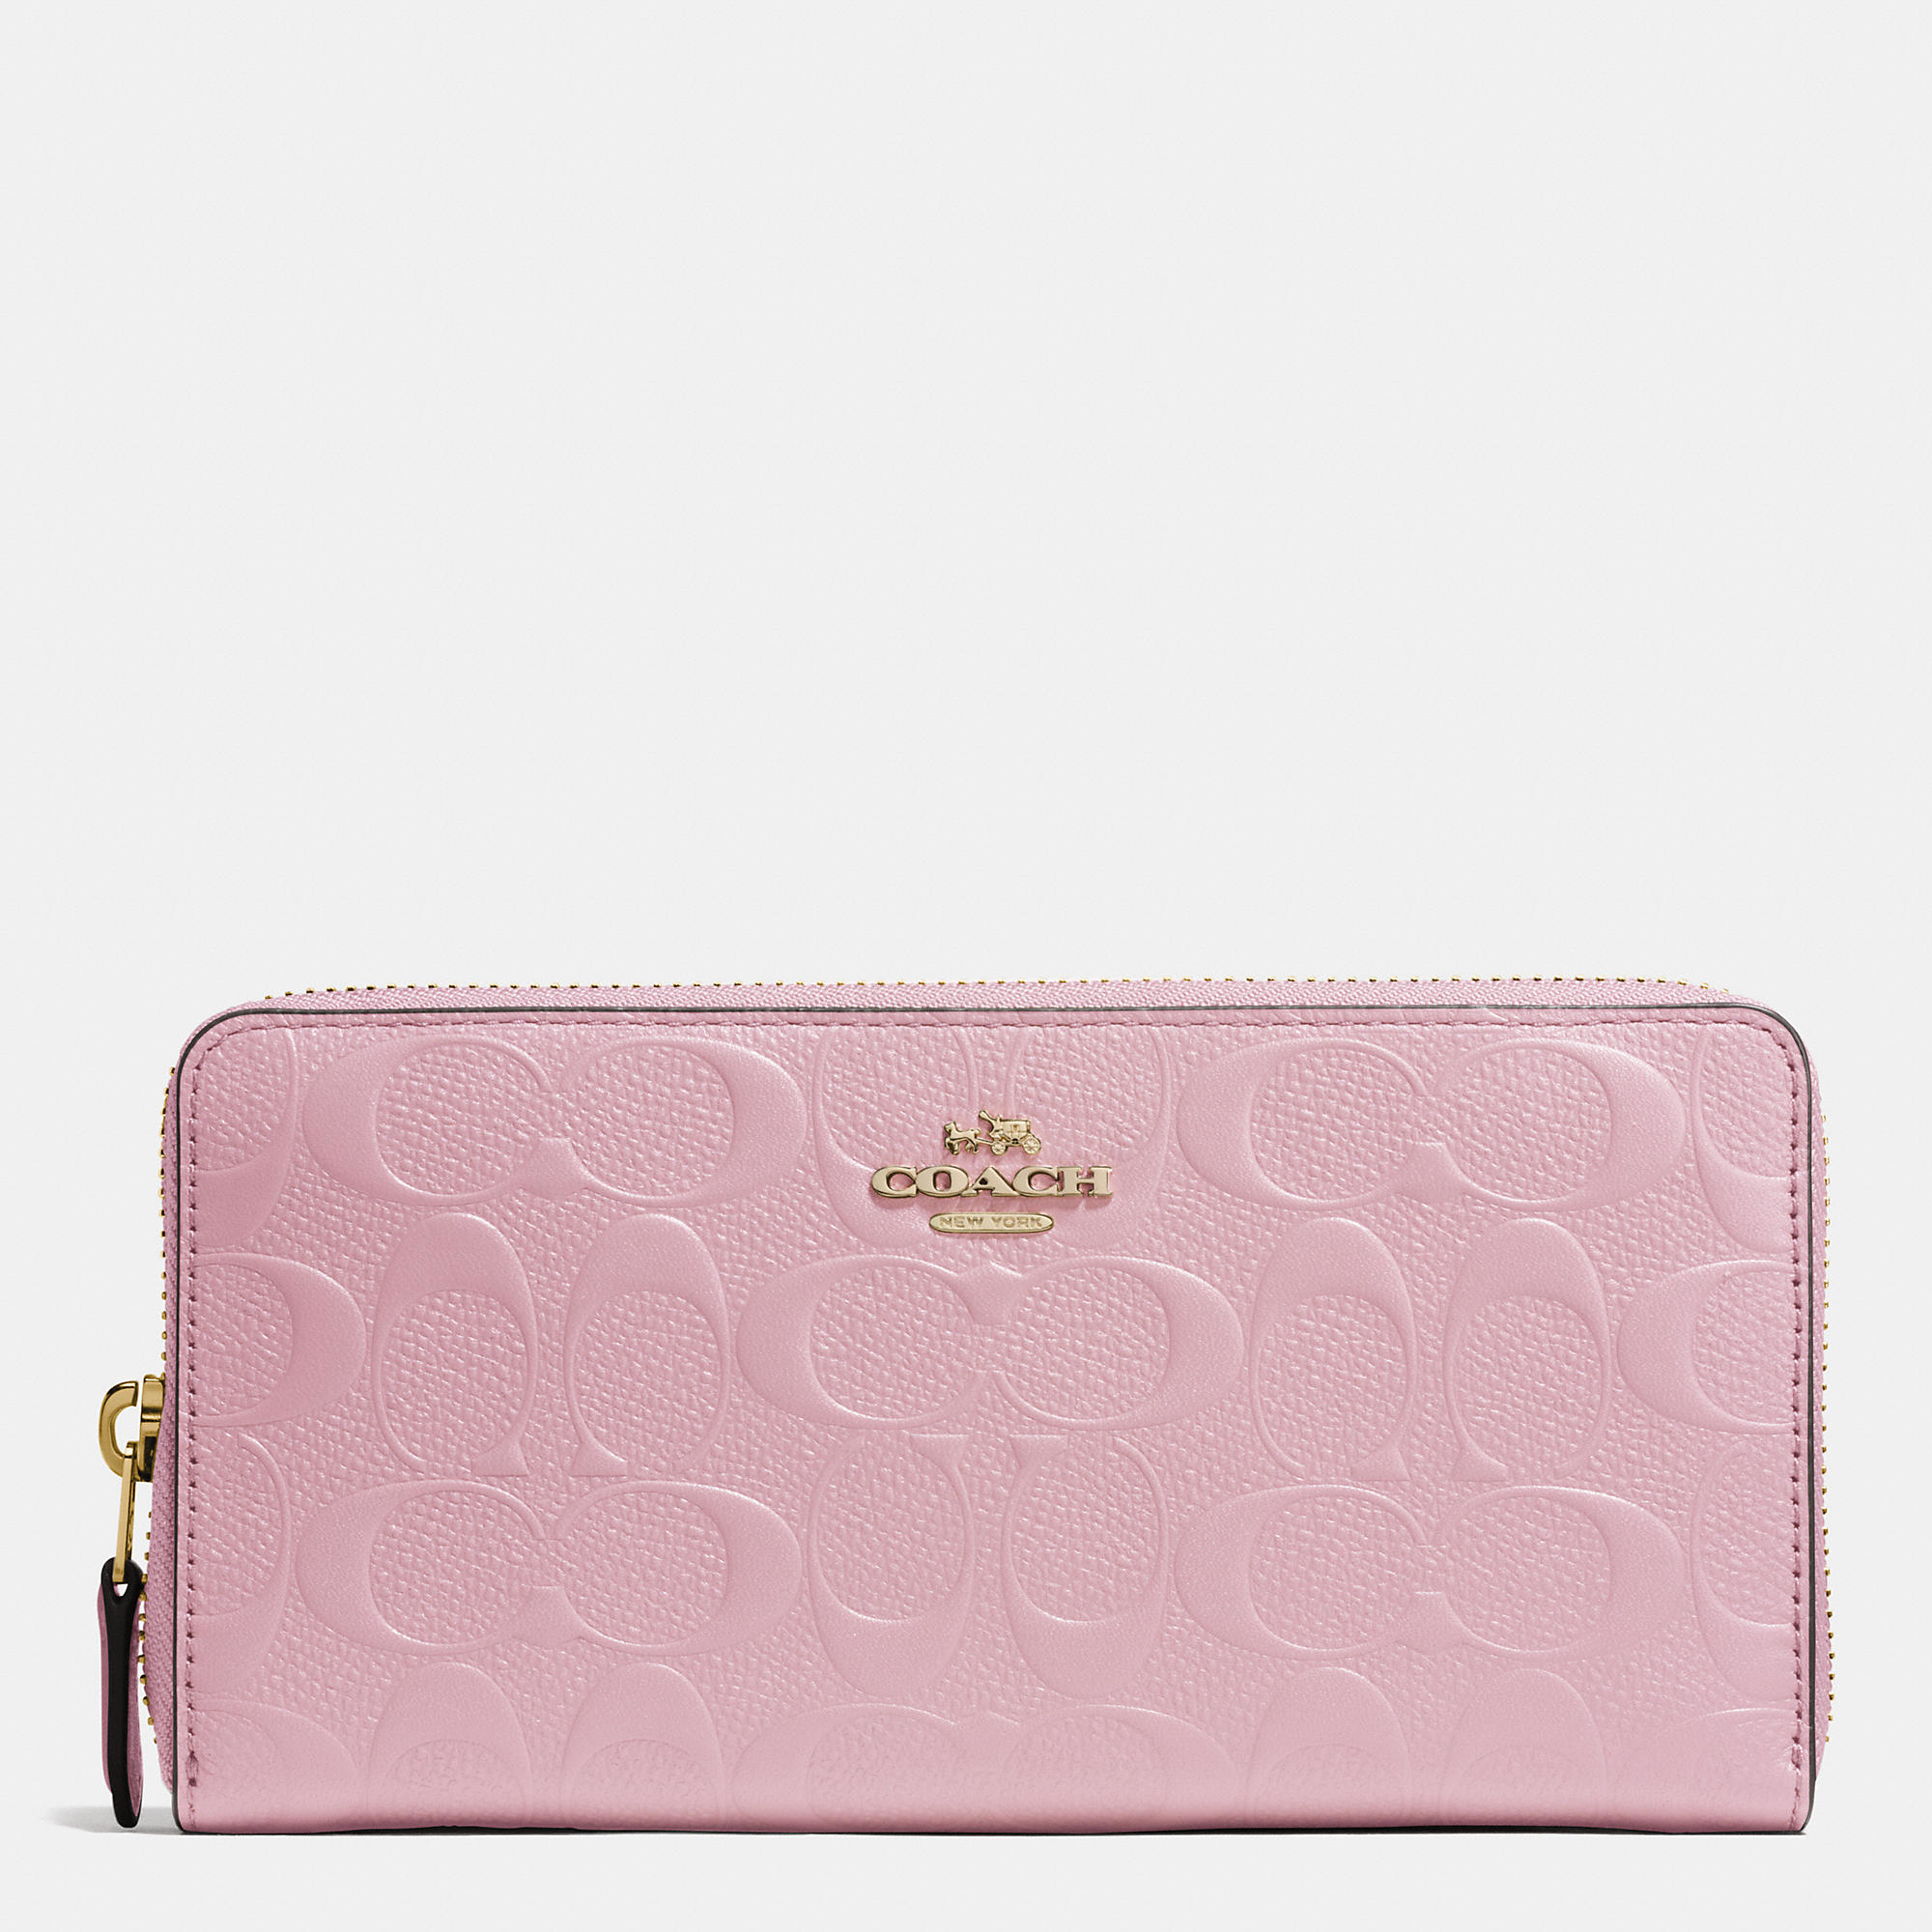 COACH Accordion Zip Wallet In Signature Embossed Leather in